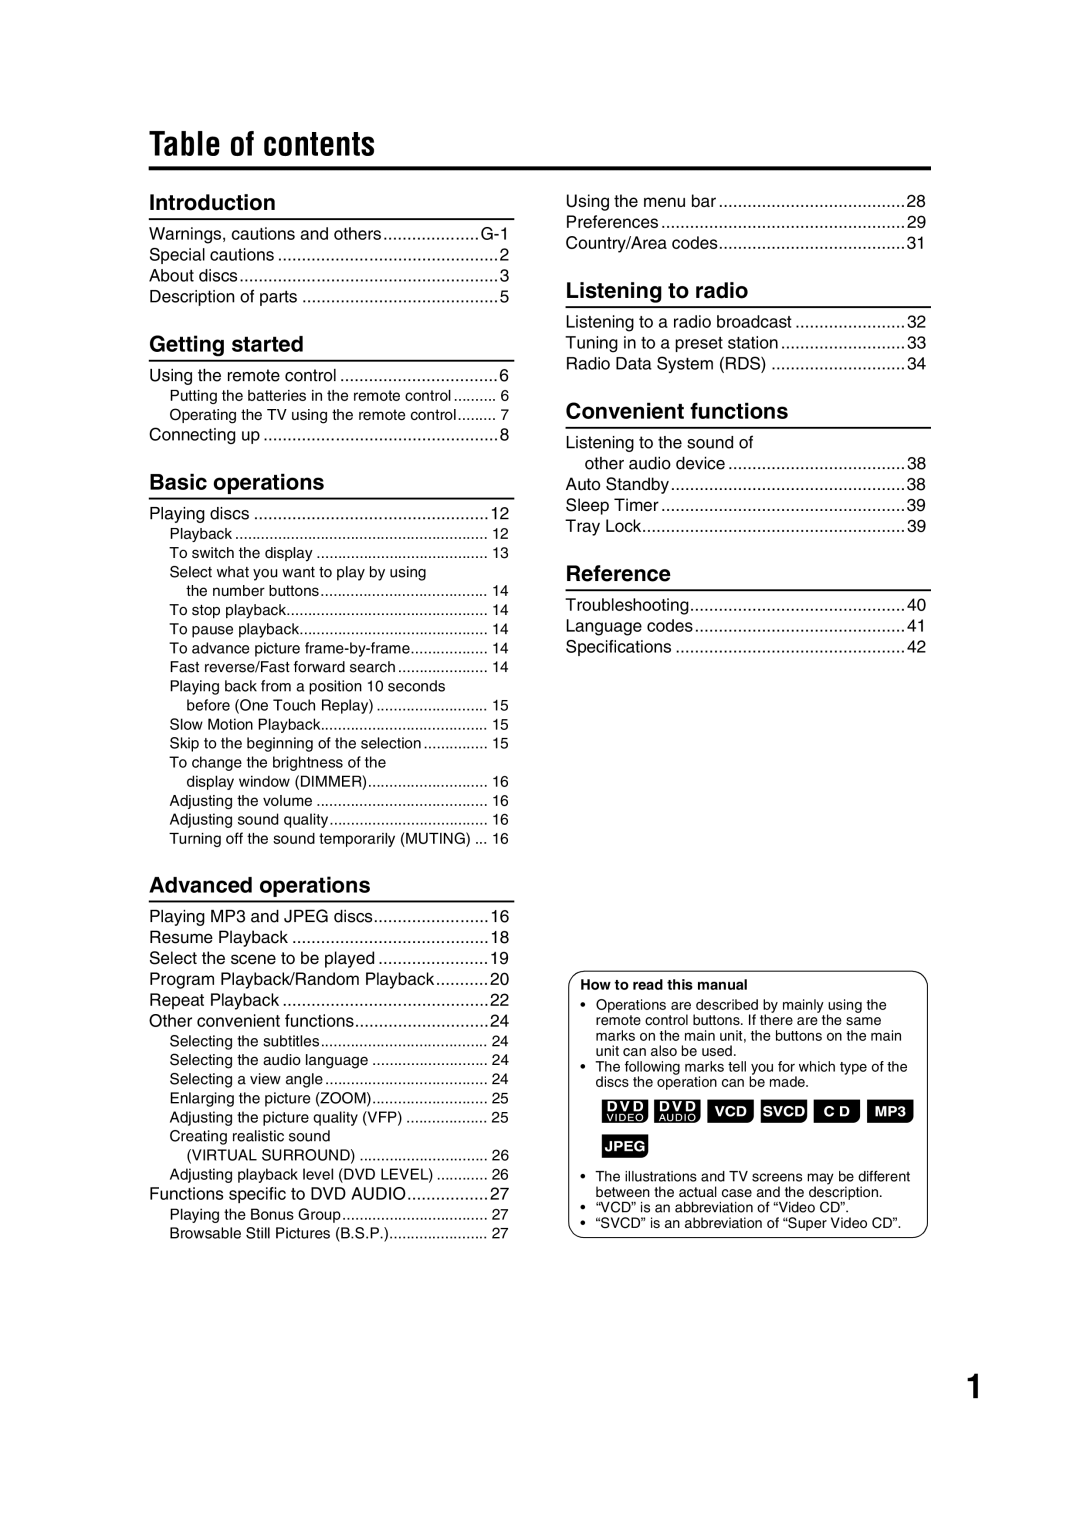 JVC LVT1284-004B Table of contents, Getting started, Basic operations, Advanced operations, Listening to radio, Reference 